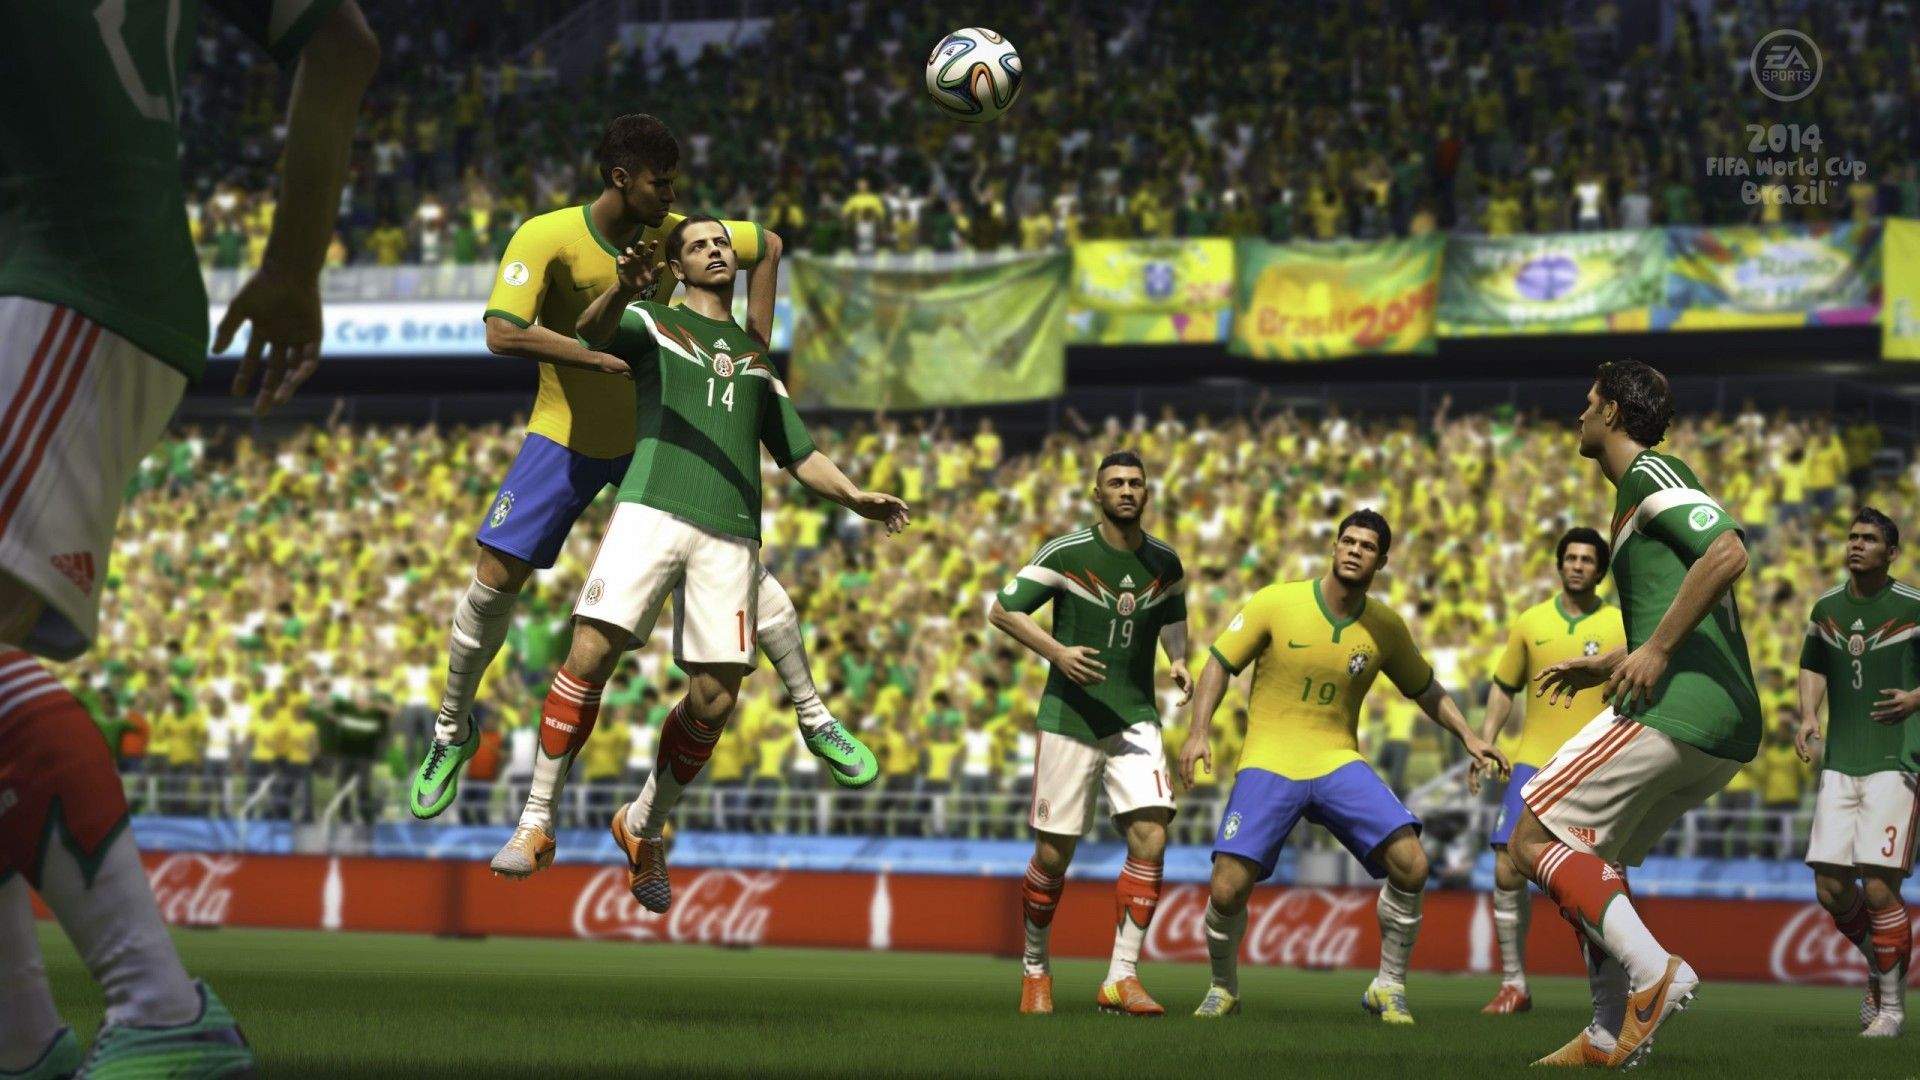 Fifa, Product Placement And The Future Of Ads In Video Games